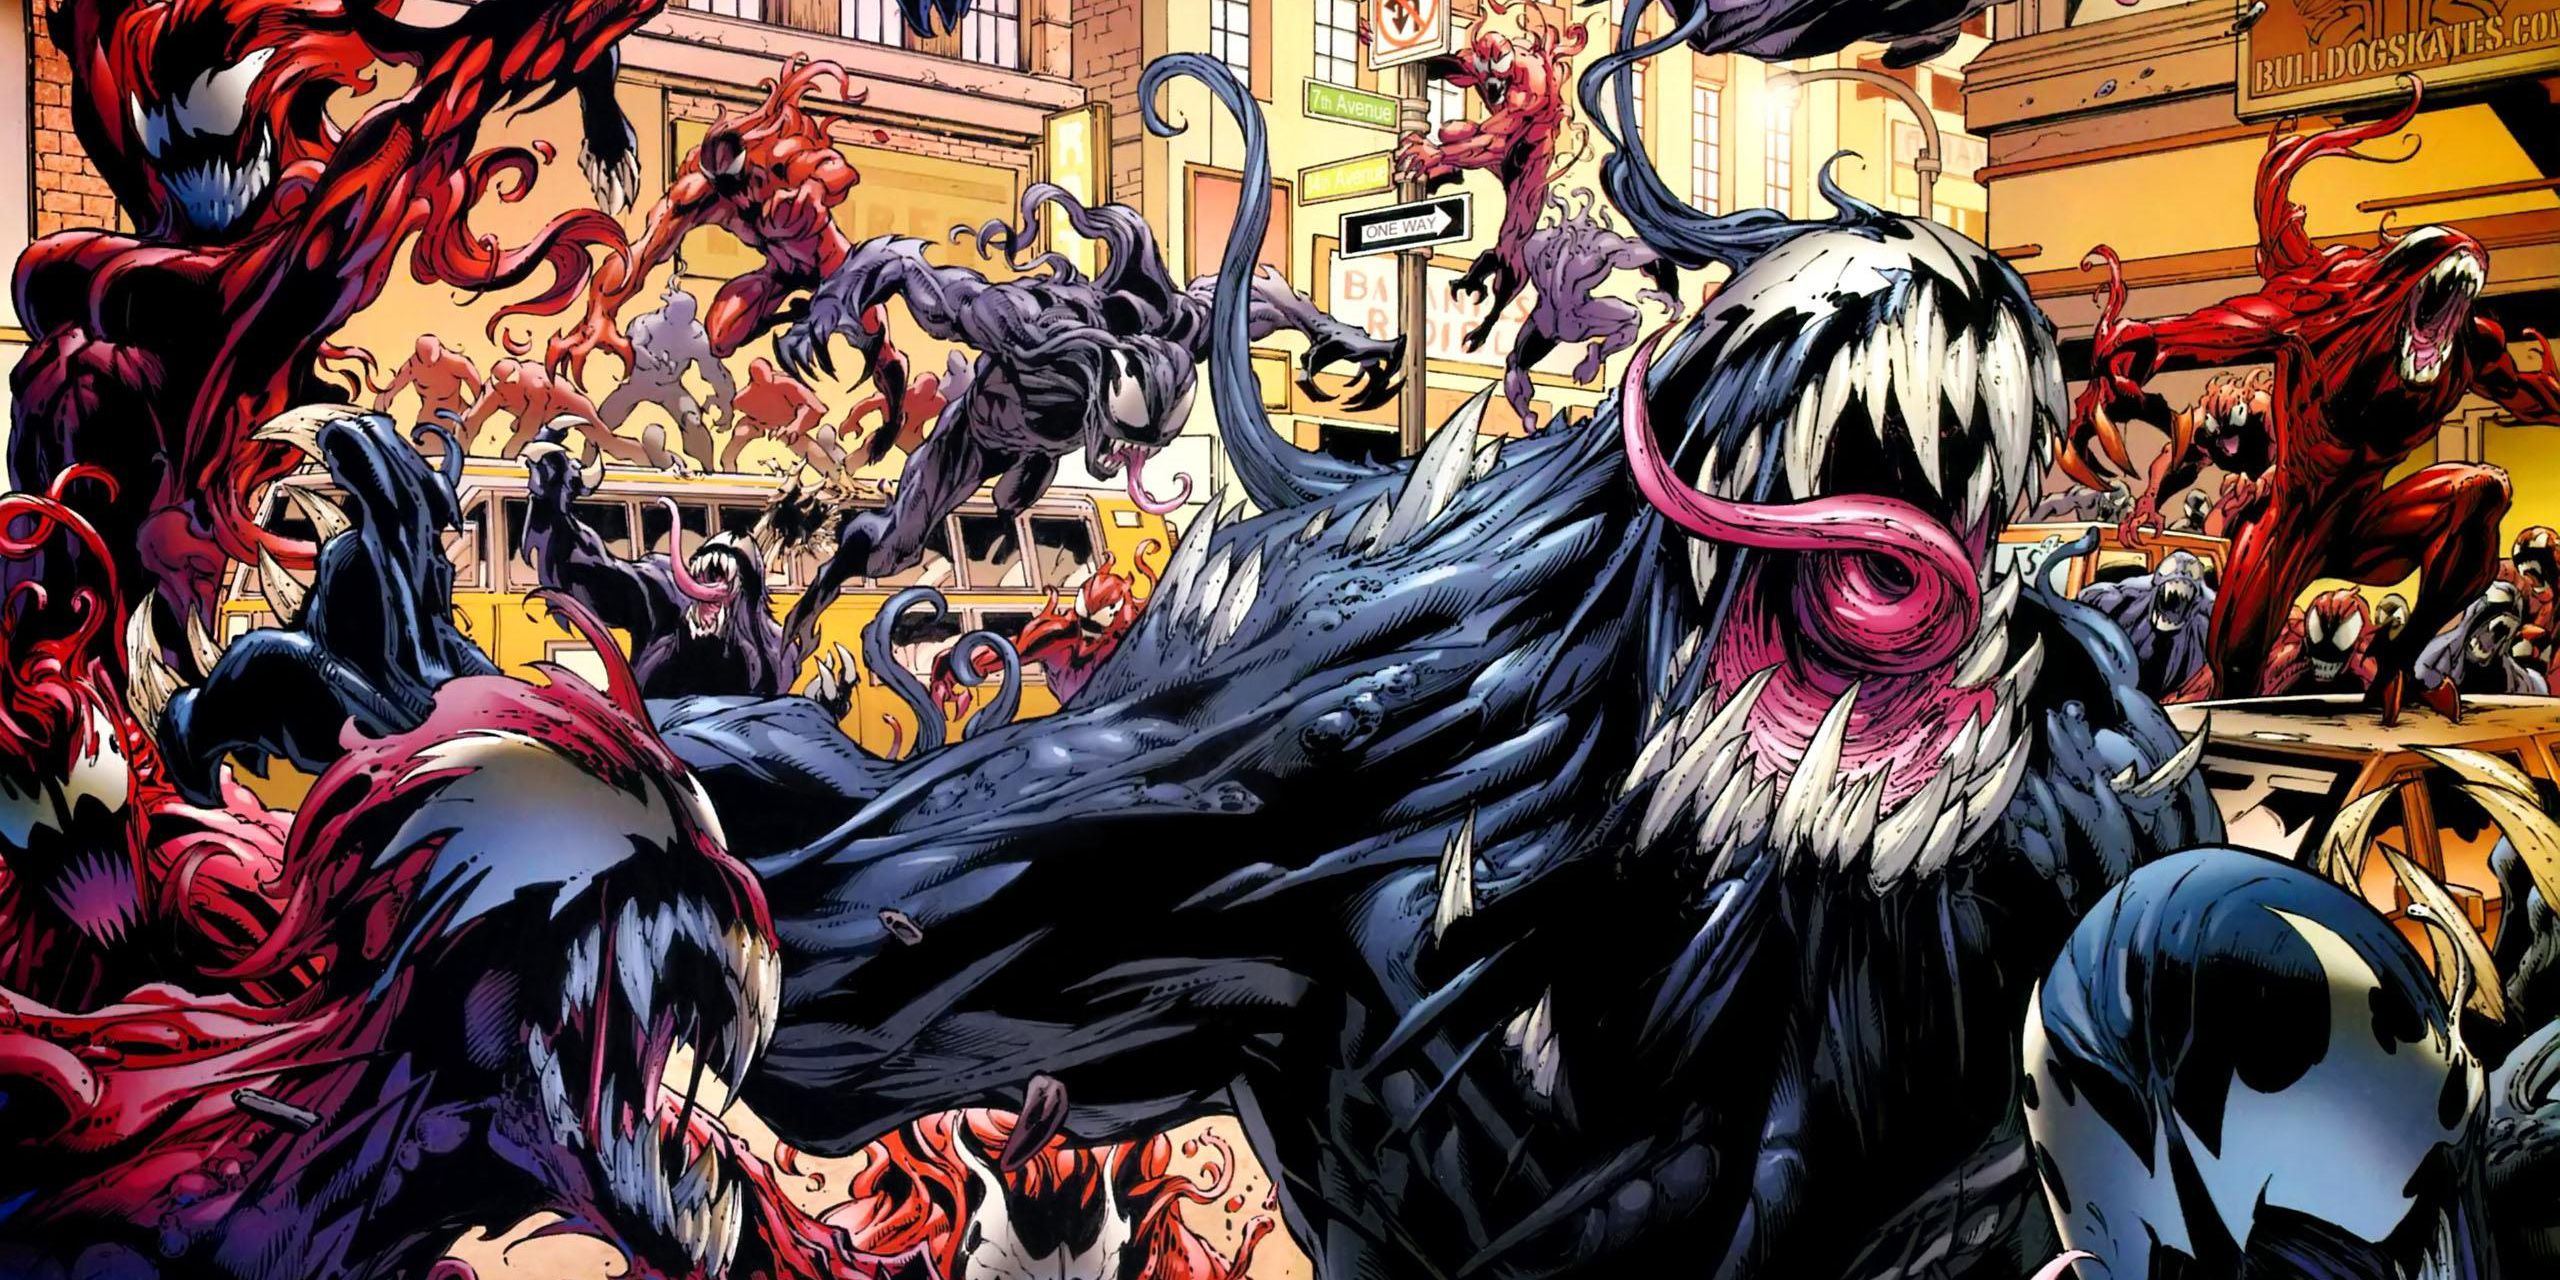 Chaos breaks out on Klyntar, the symbiote homeworld